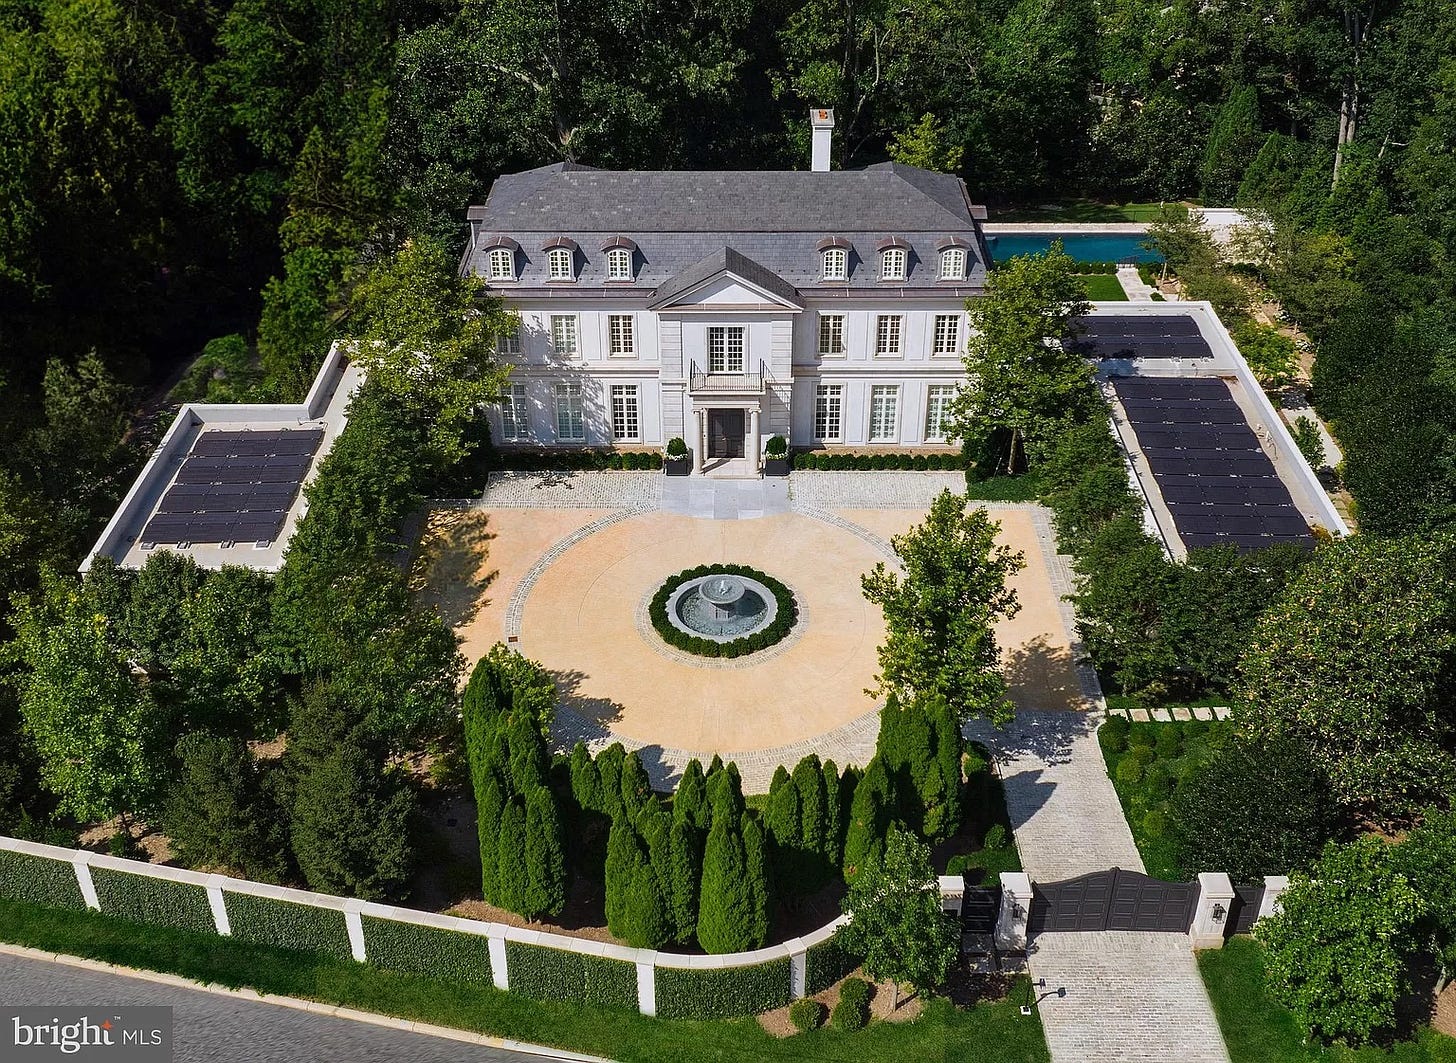 Aerial view of a large mansion with solar panels on two adjacent flat roofed structures — garages we guess.